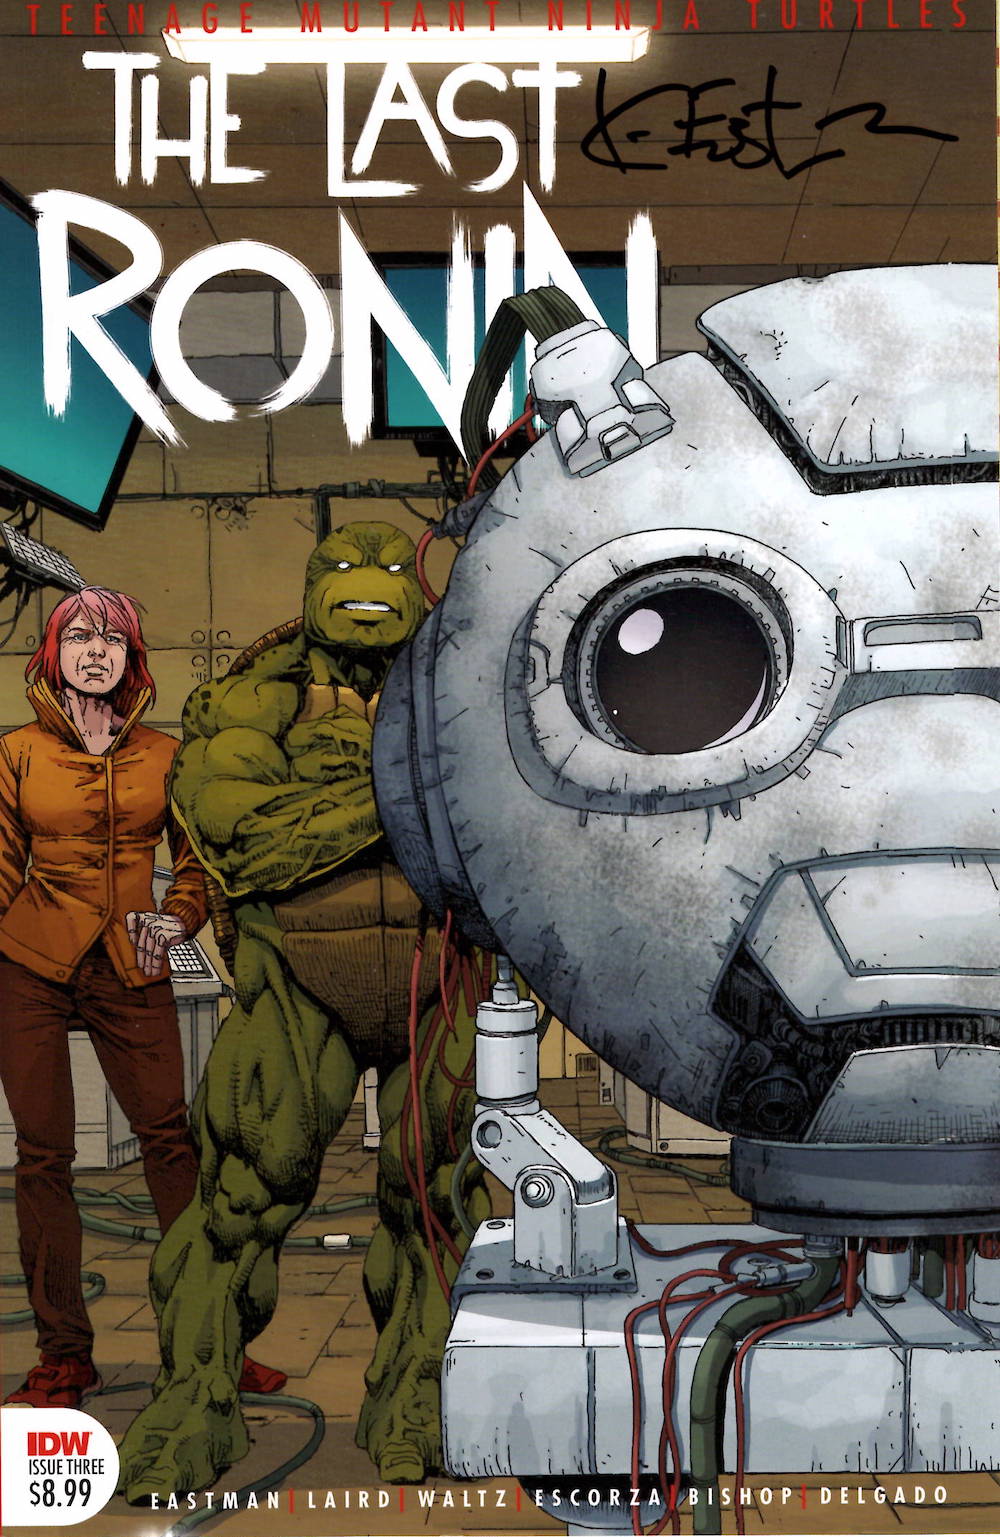 The Last Ronin Issue 3 Second Printing – Signed by Eastman